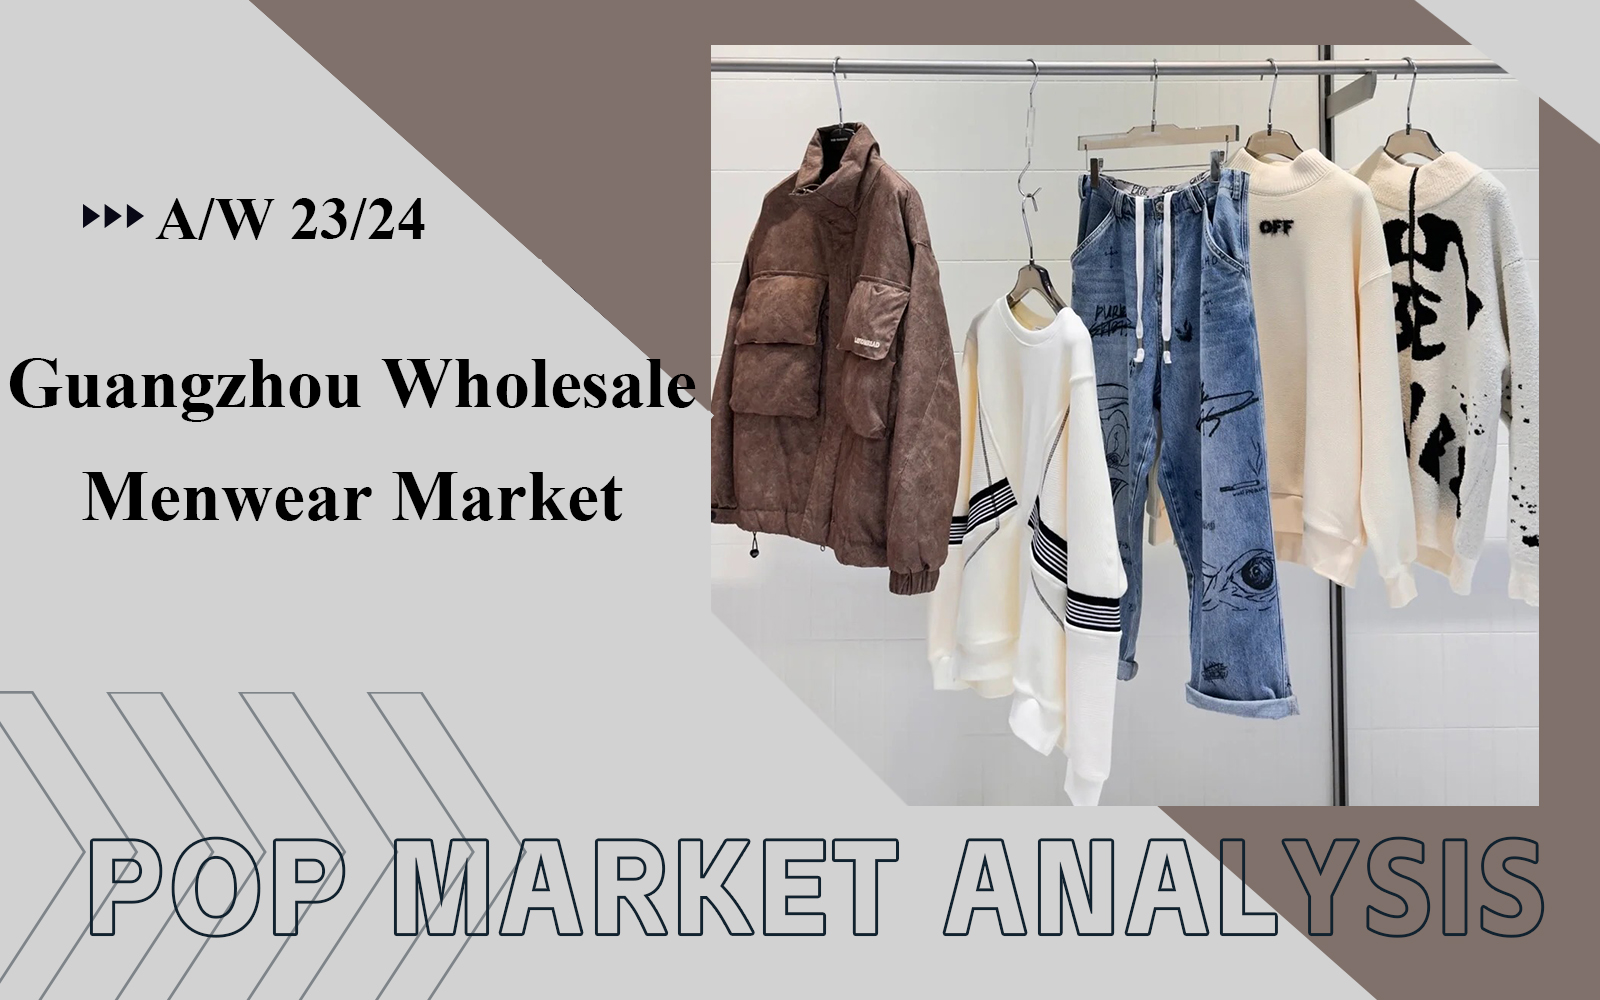 The Comprehensive Analysis of Menswear Wholesale Market in Guangzhou from November to December